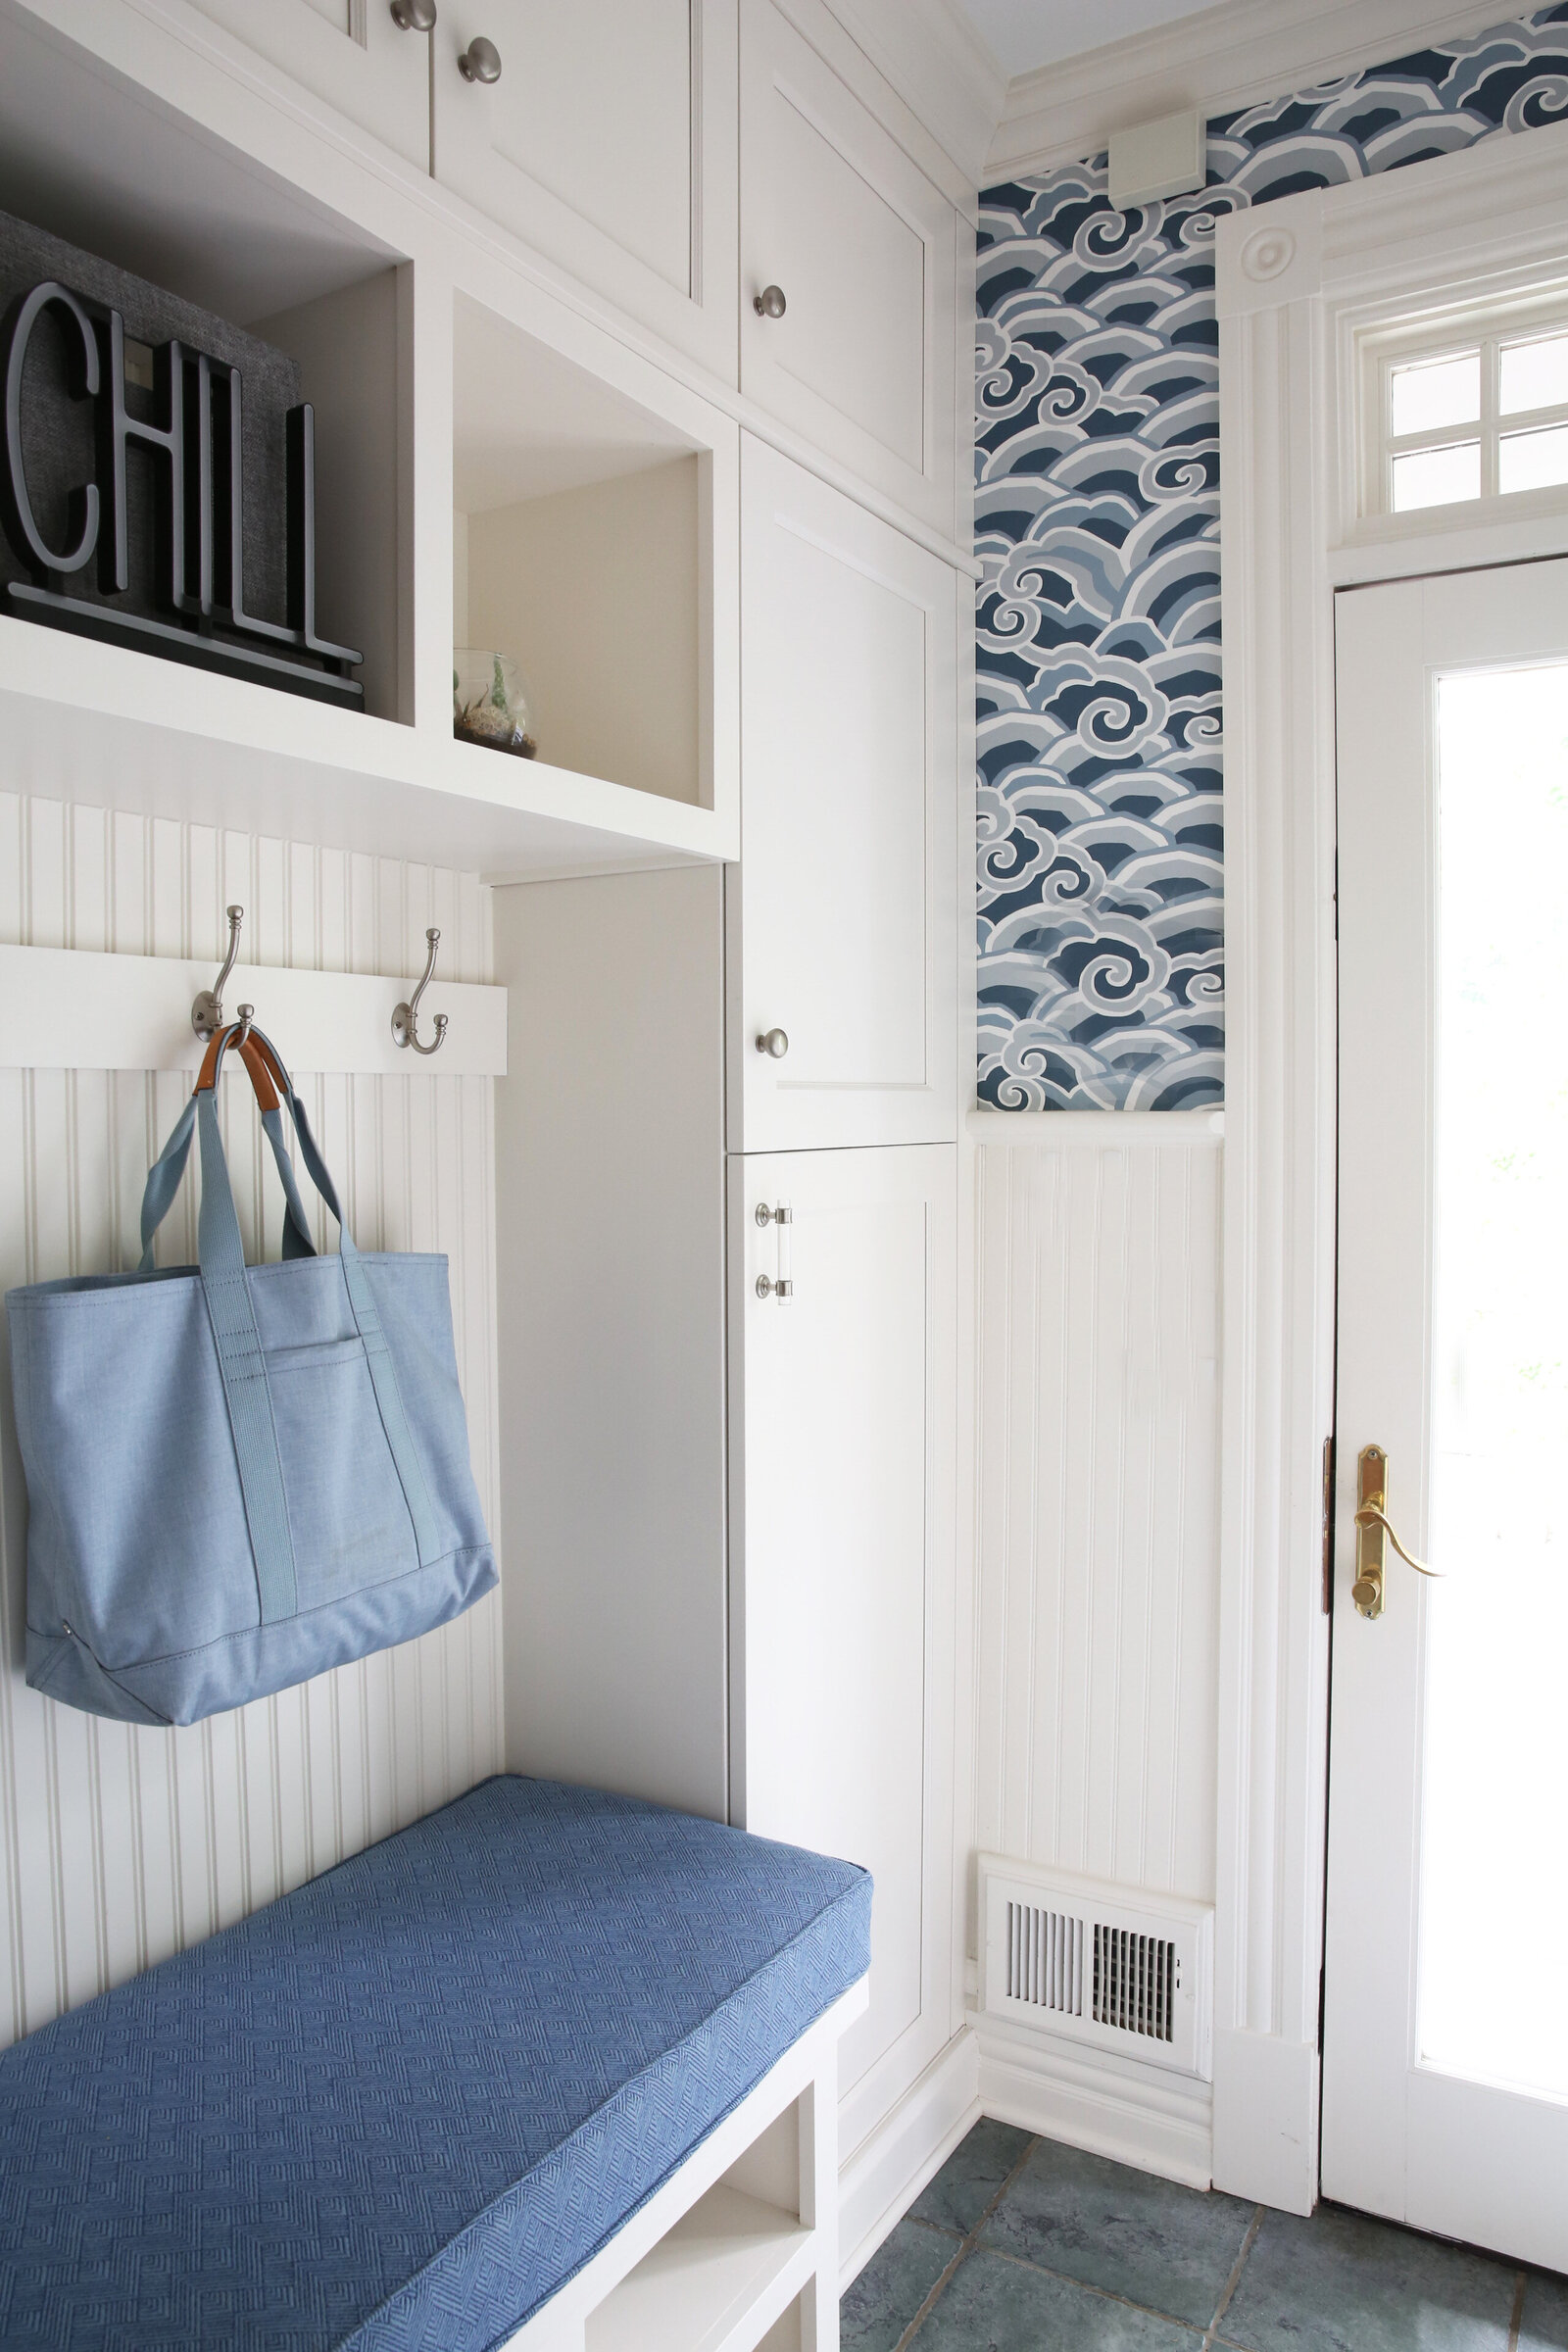 BUILT-IN-MUDROOM-WITH-BLUE-CUSTOM-CUSHION